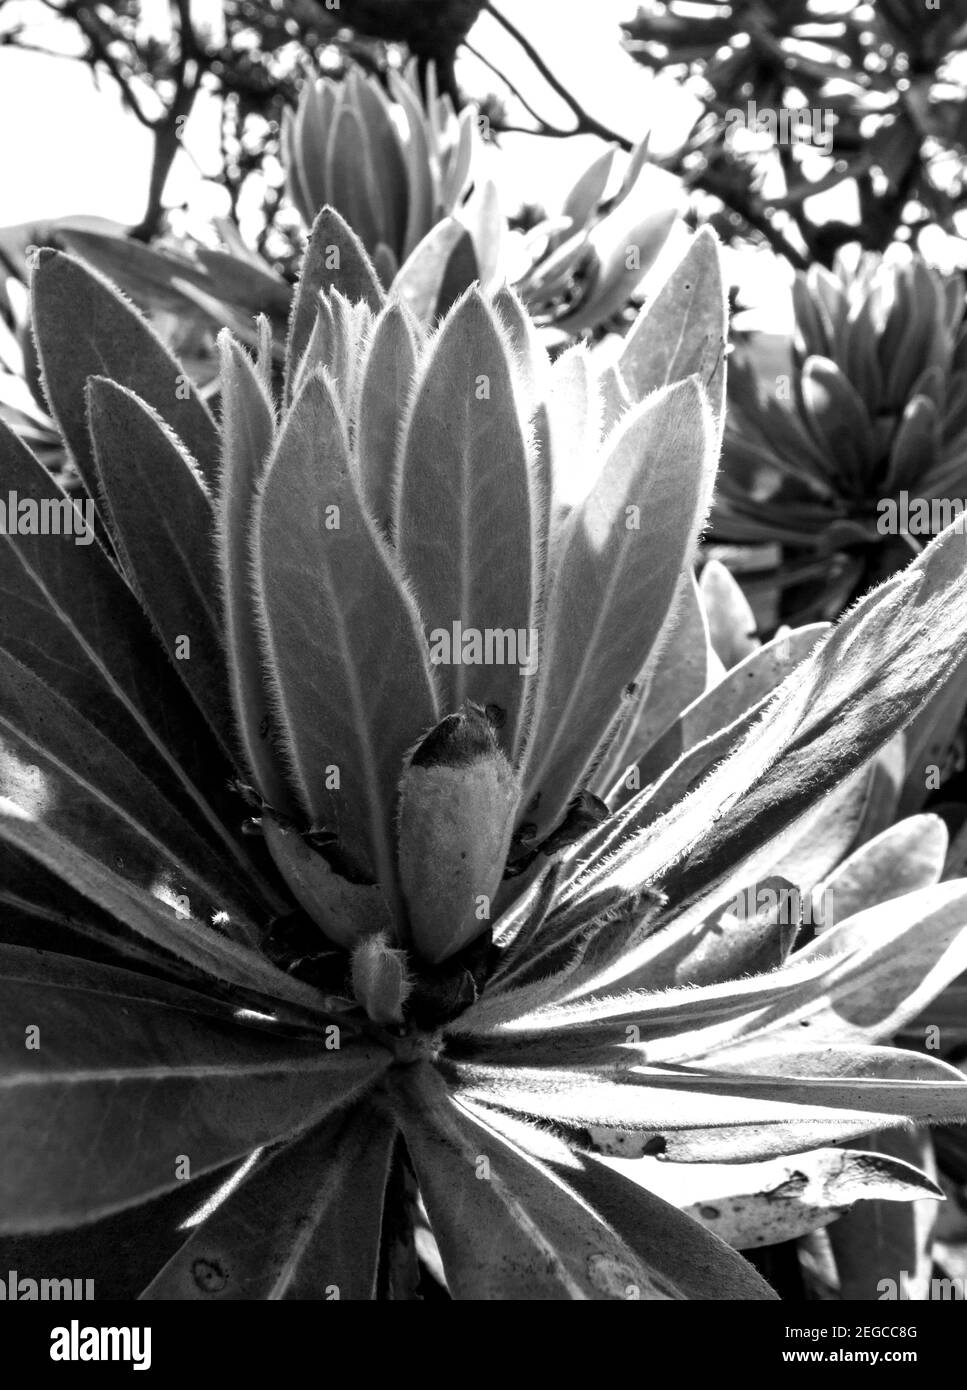 Close-up view of the new leaves on the point of a branch of a Common Protea Bush, Protea caffra, in Monochrome, photographed in the Central Drakensber Stock Photo